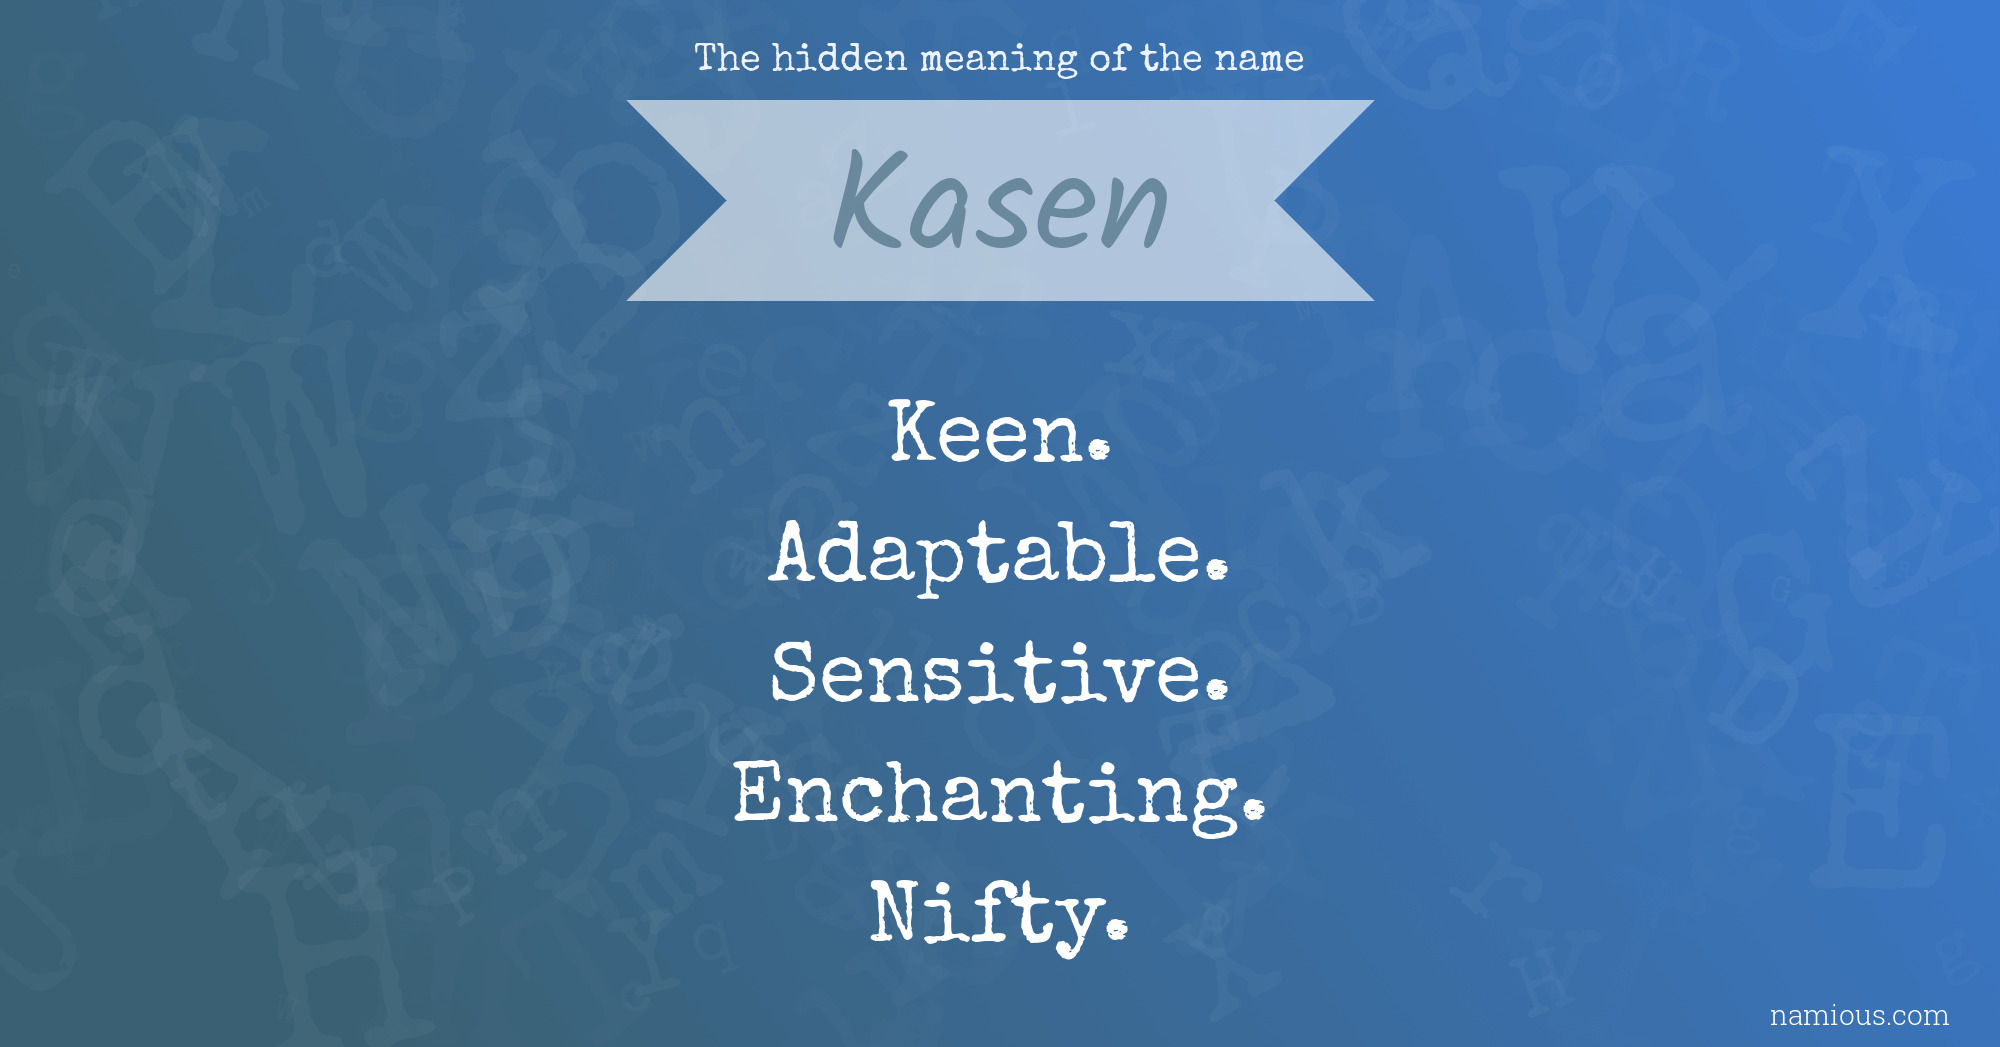 The hidden meaning of the name Kasen